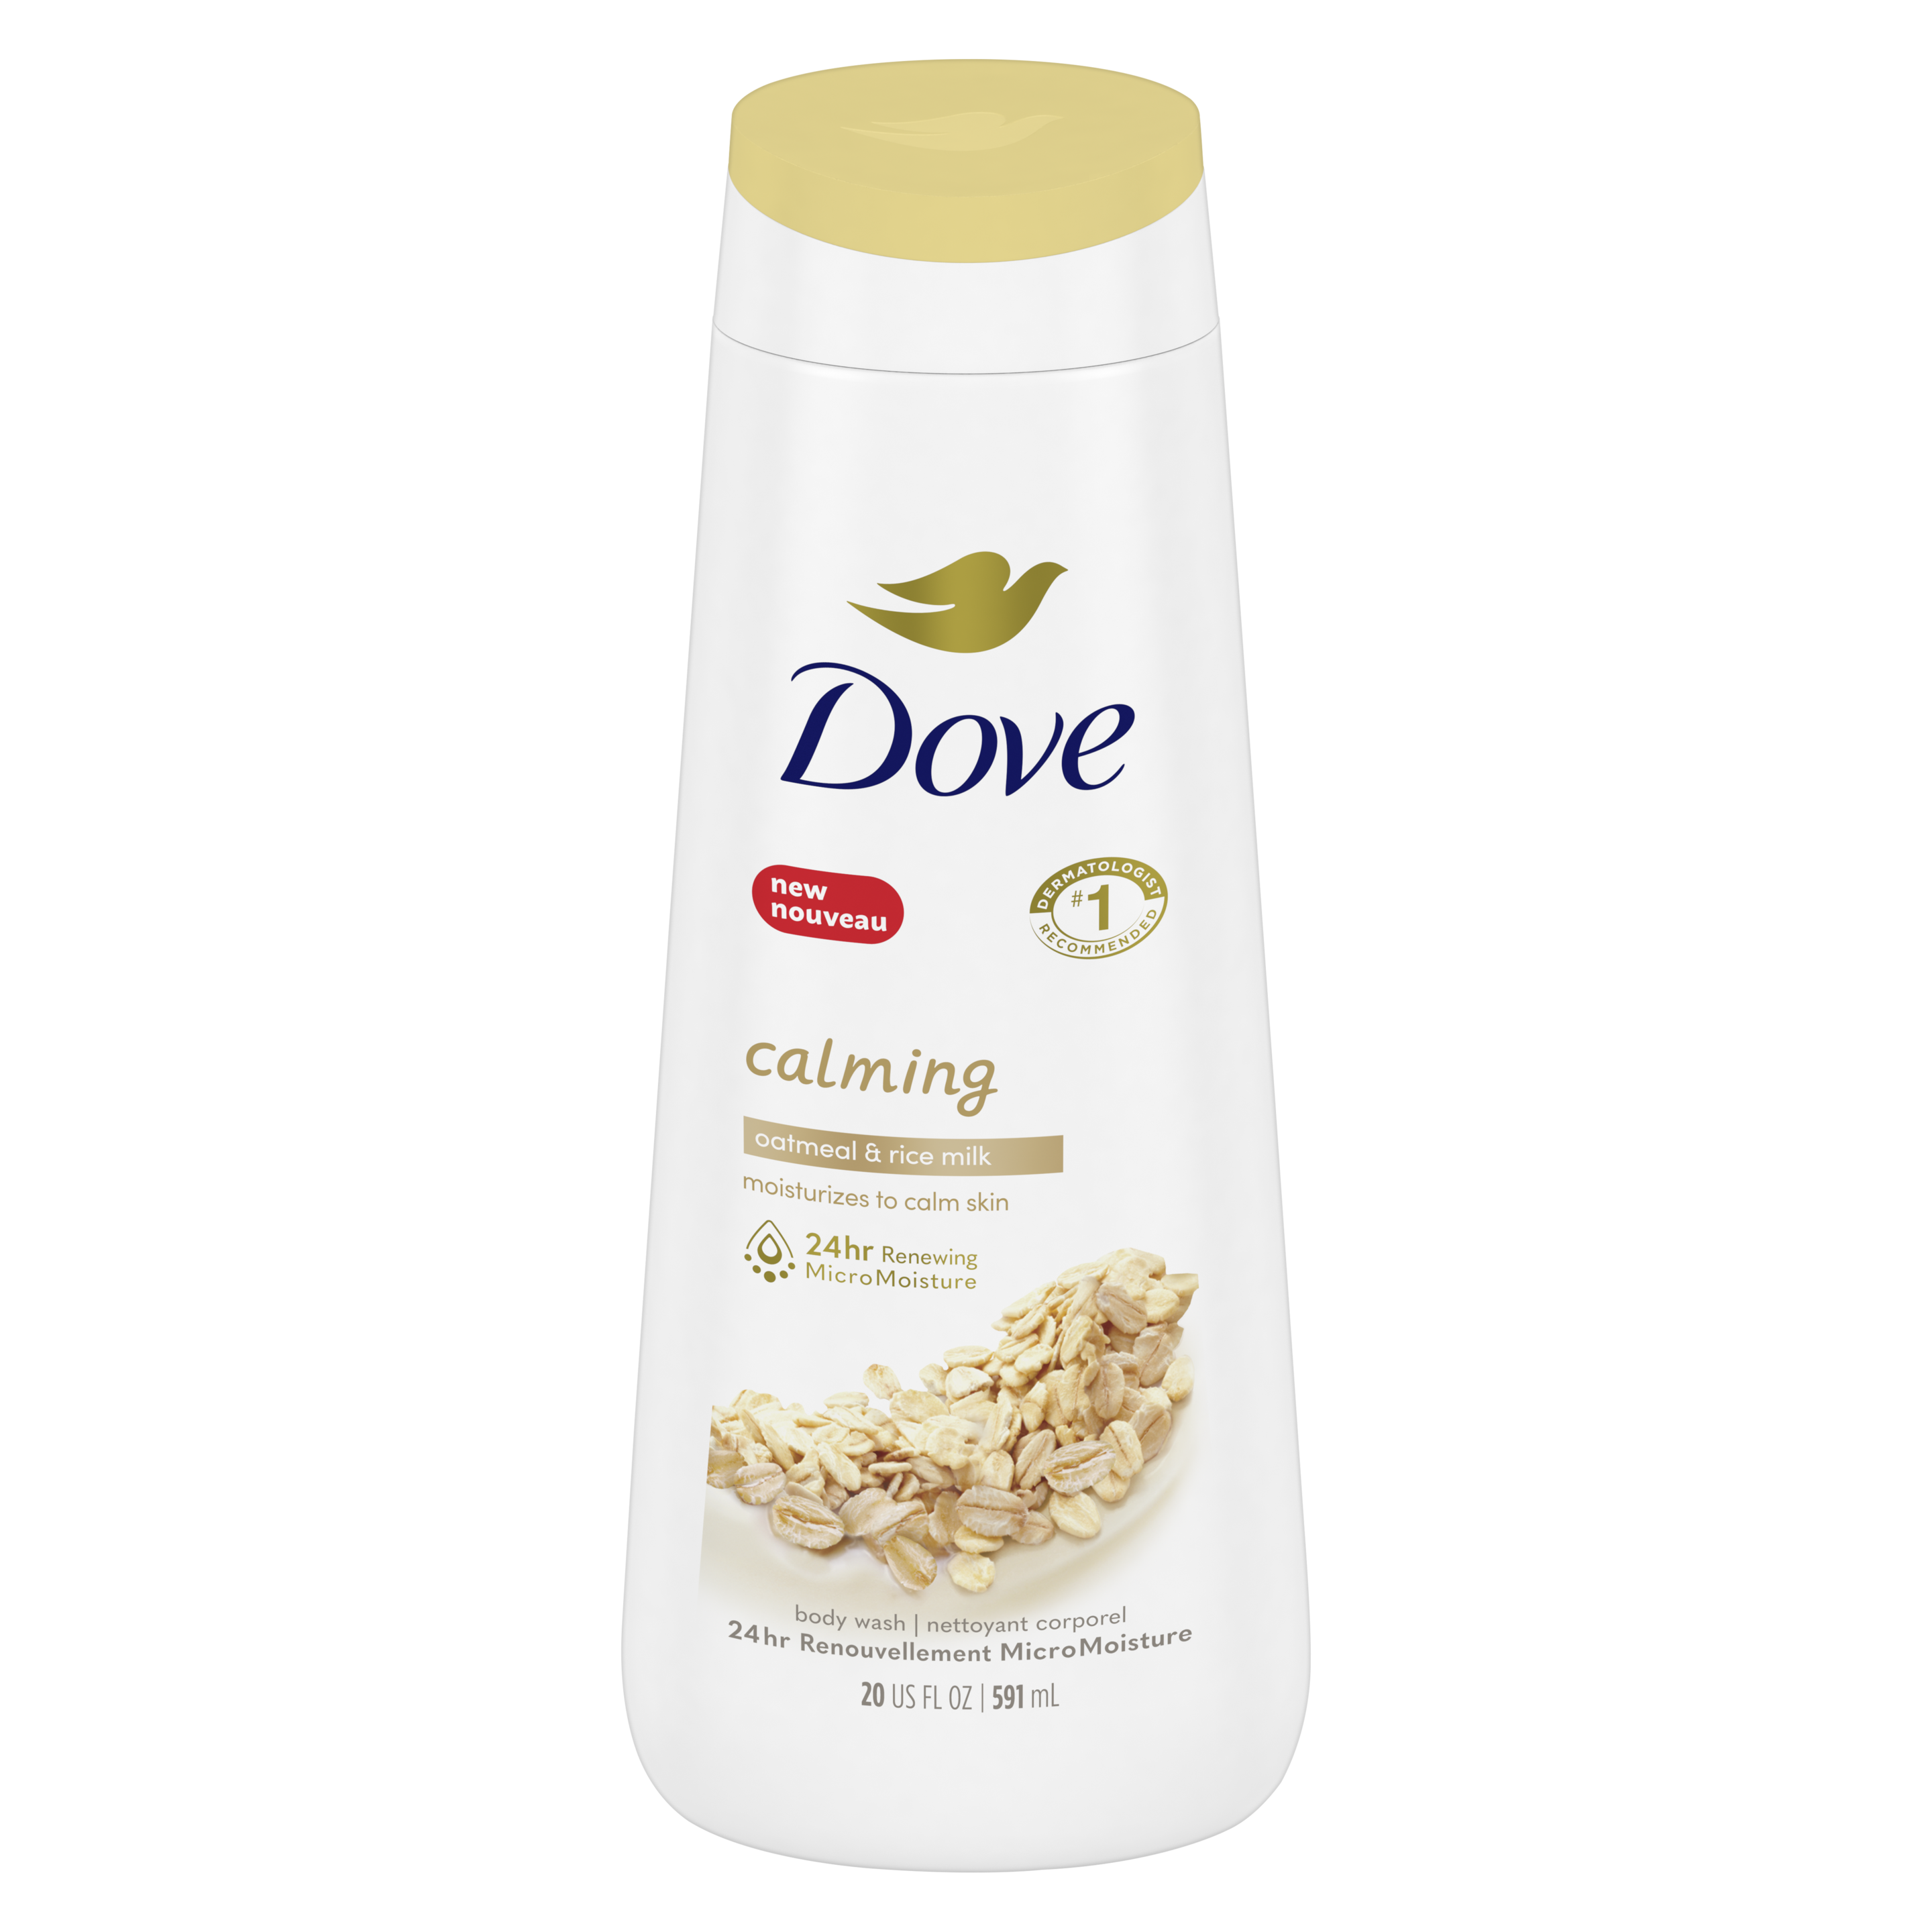 Dove Calming Body Wash with Oatmeal & Rice Milk